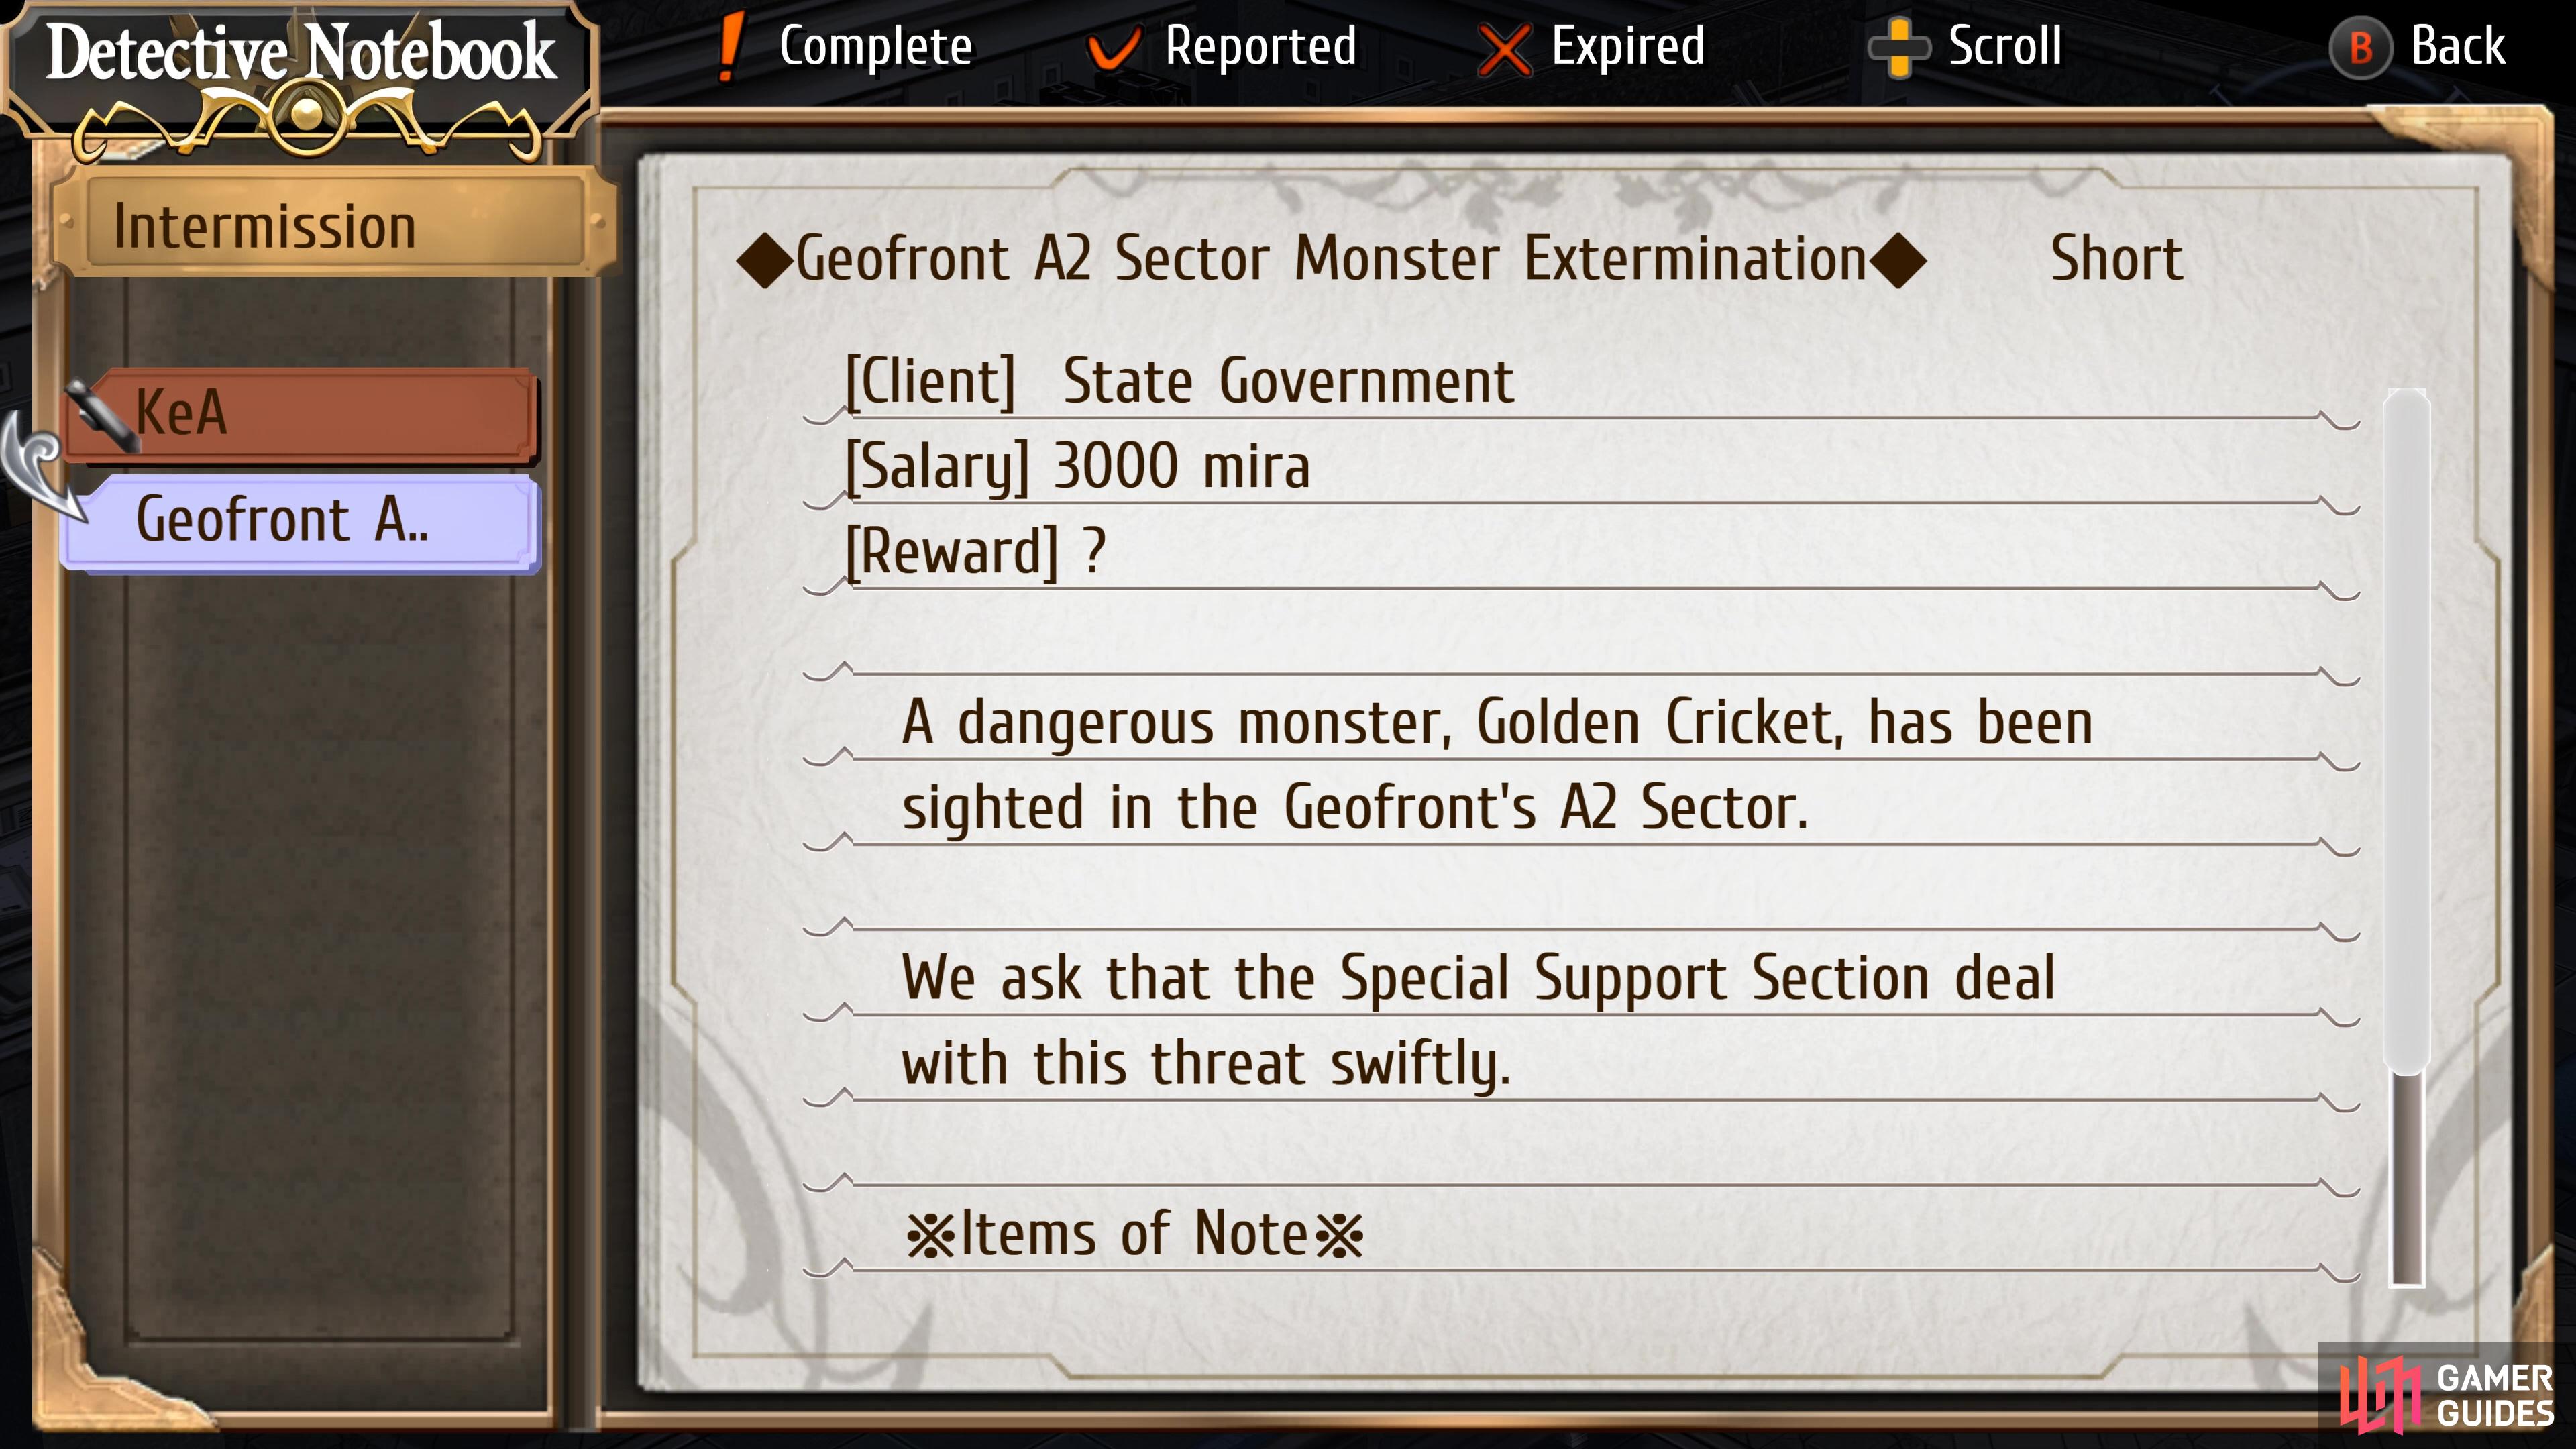 Geofront A2 Monster Extermination is a hidden request during the Intermission.